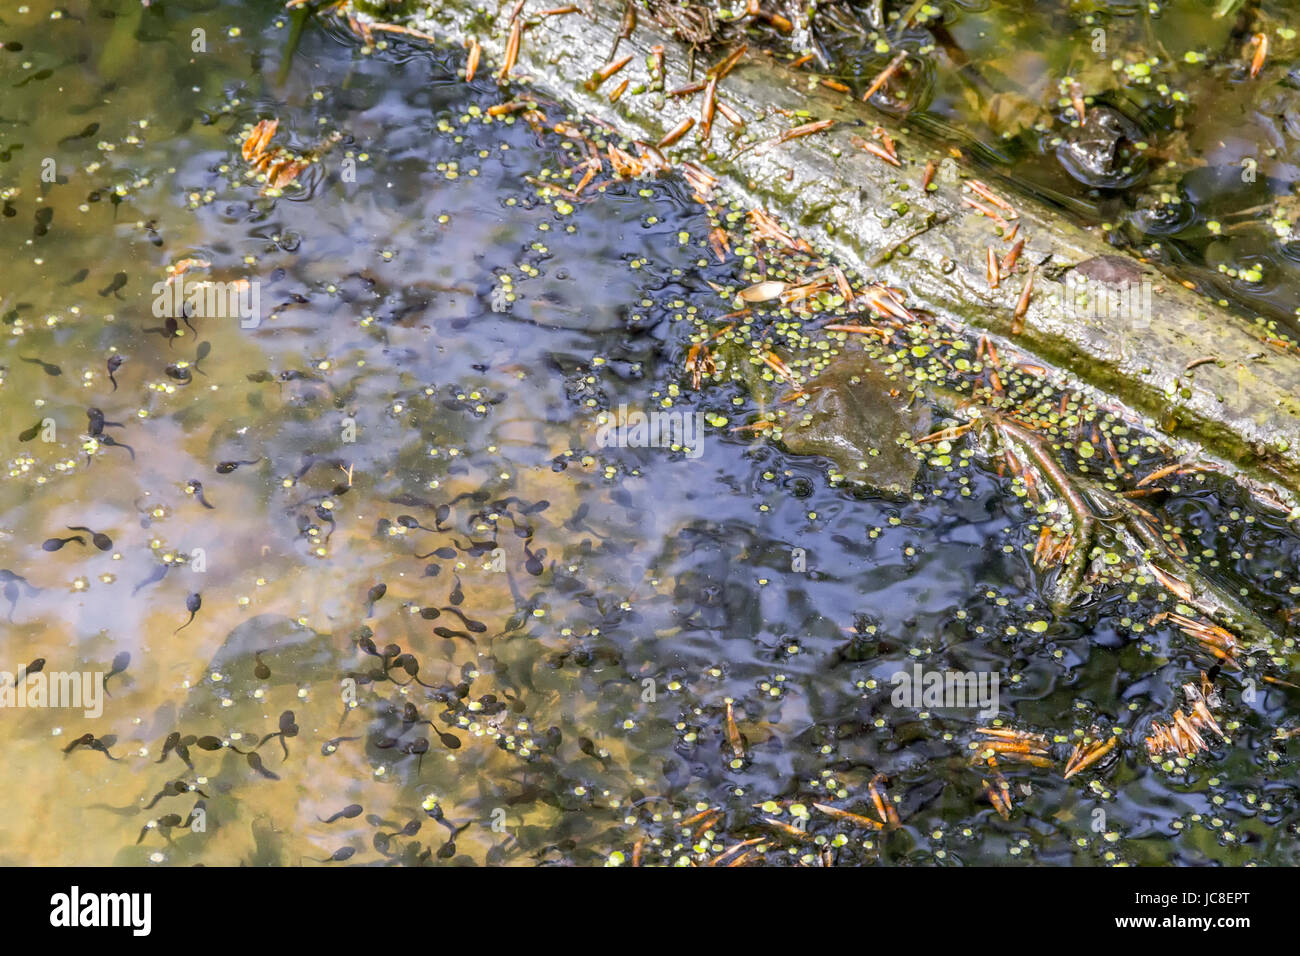 high angle view showing lots of tadpoles in natural ambiance Stock Photo